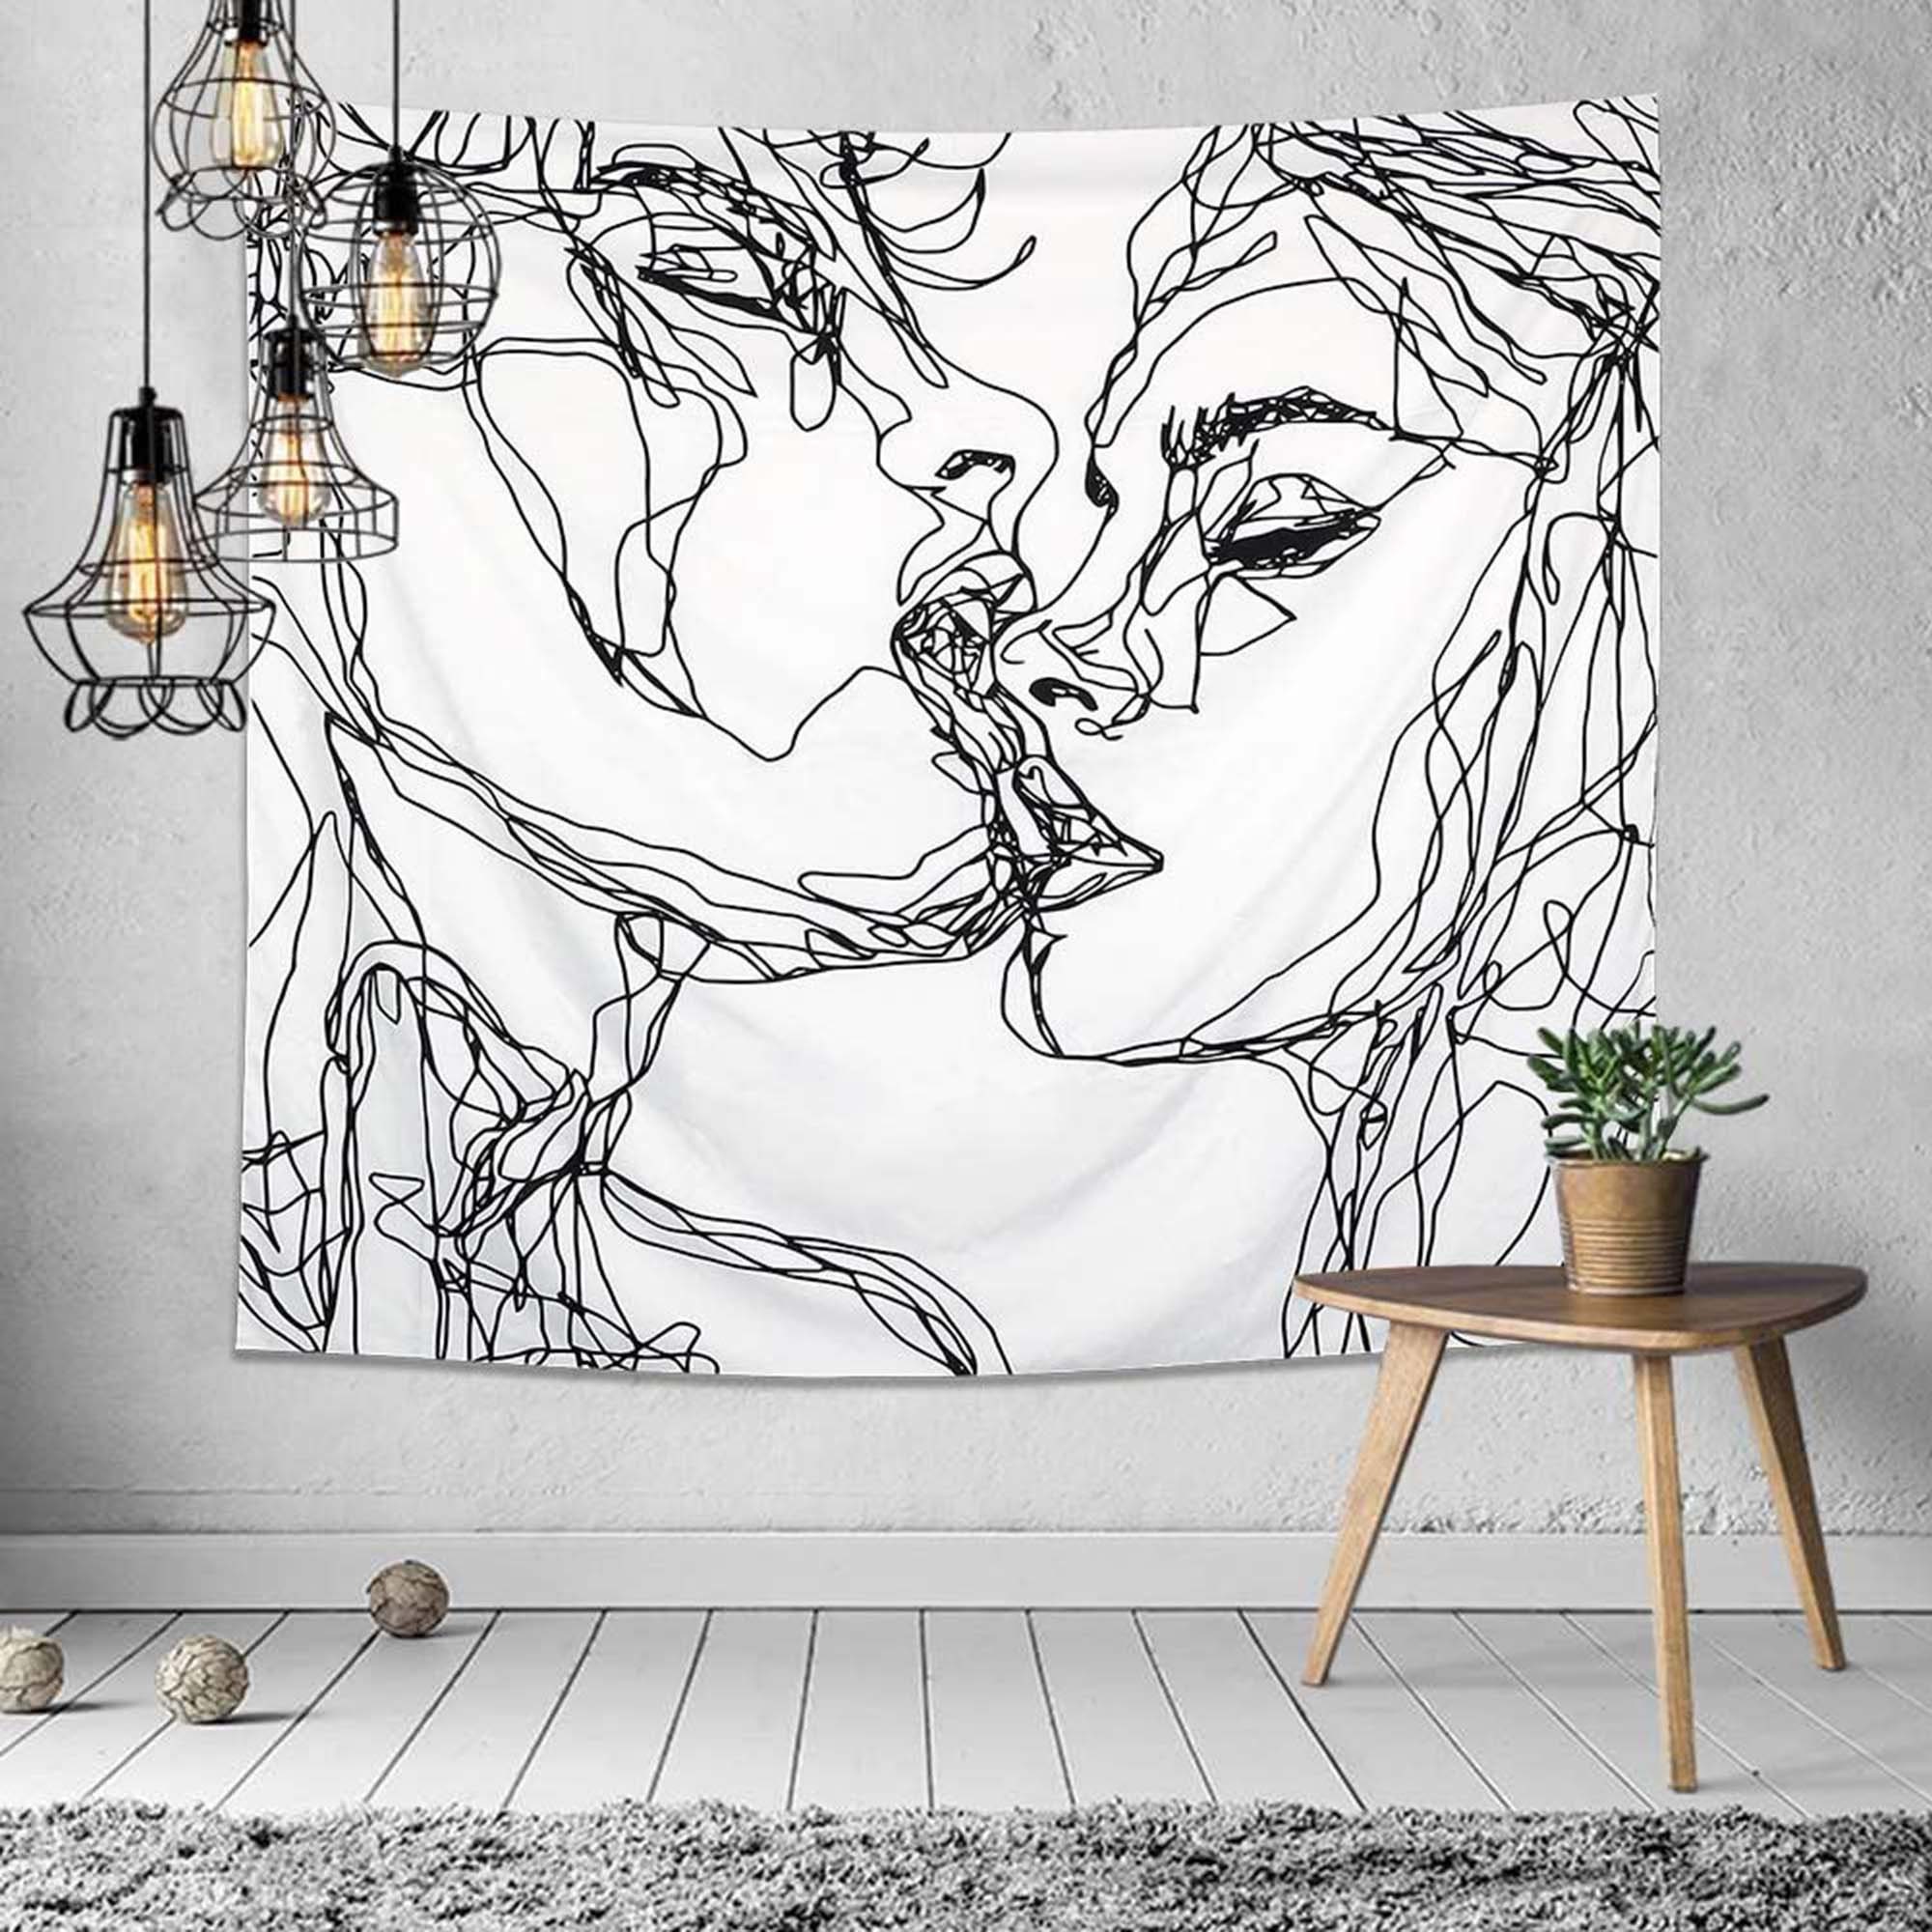 Abstract Sketch Art Kissing Lovers Tapestry Wall Hanging Blanket Bedroom Decor n 